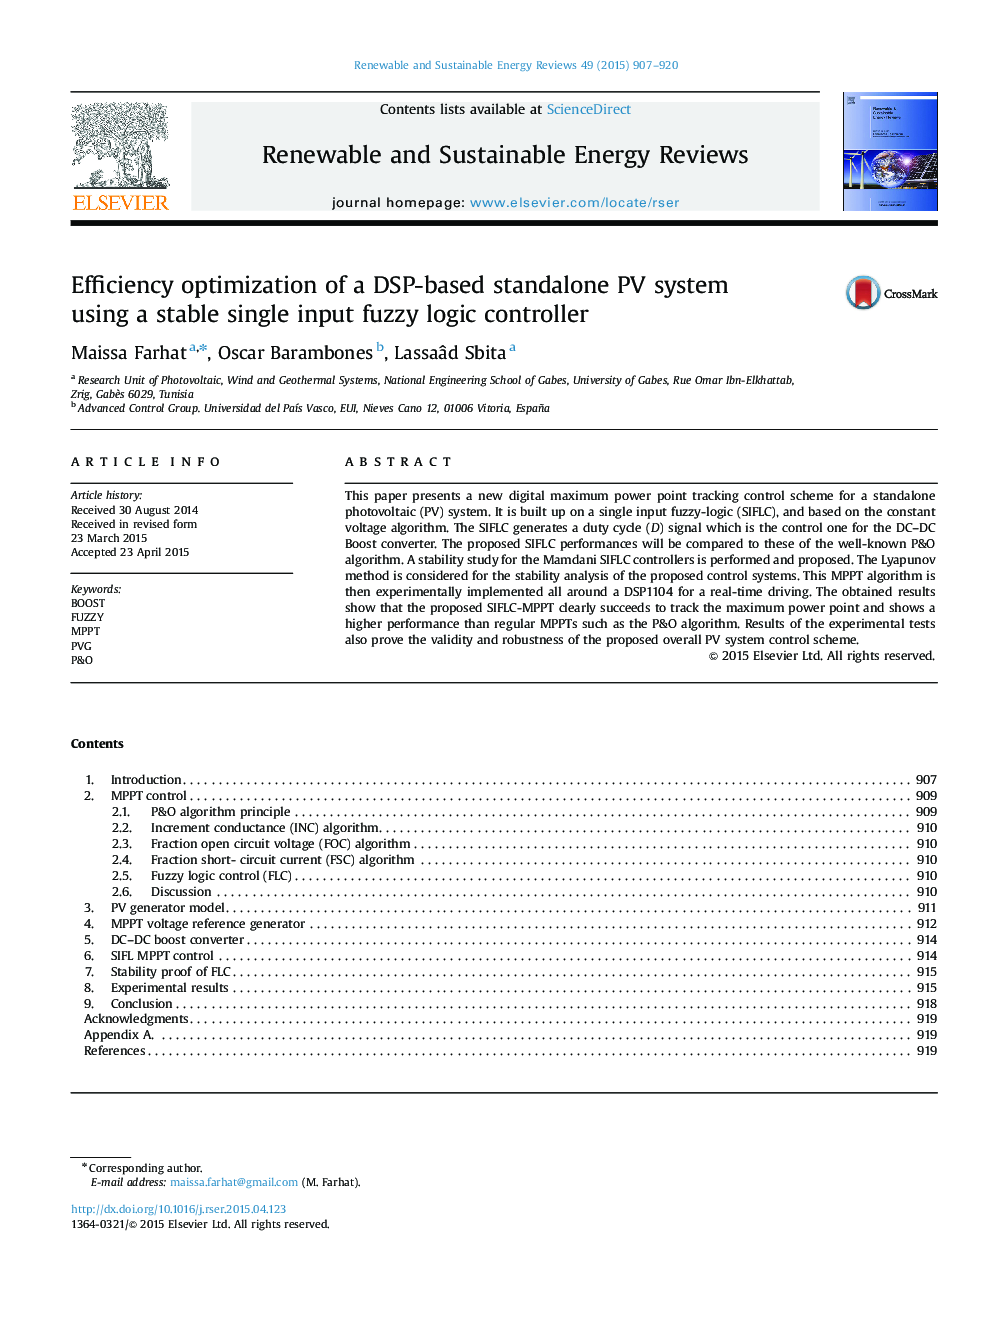 Efficiency optimization of a DSP-based standalone PV system using a stable single input fuzzy logic controller